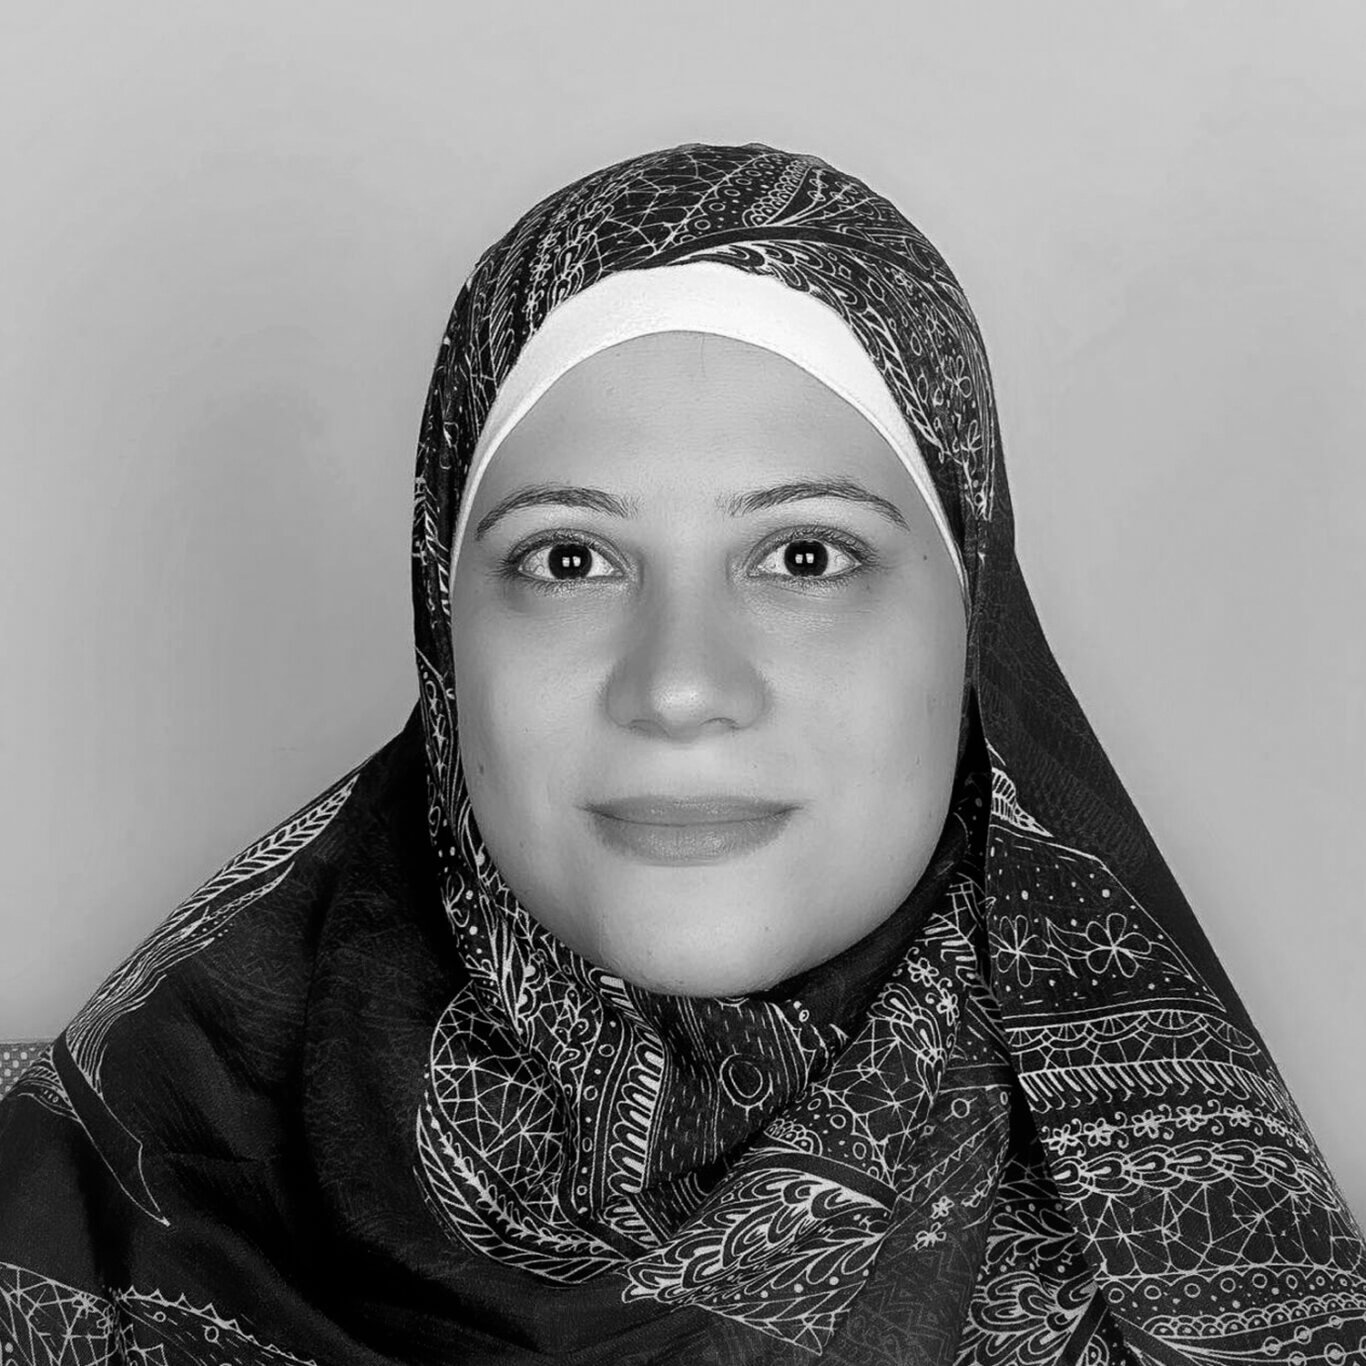 An up close headshot of a woman with light skin tone and a slight smile looks directly at us with dark brown eyes and thin arched eyebrows. She wears a multi toned and patterned hijab. The hijab is wrapped tightly around her head and drapes over her shoulders with soft folds in the fabric. Thin white lines adorn the scarf in geometric and floral patterns. She is in front of a plain light grey wall.